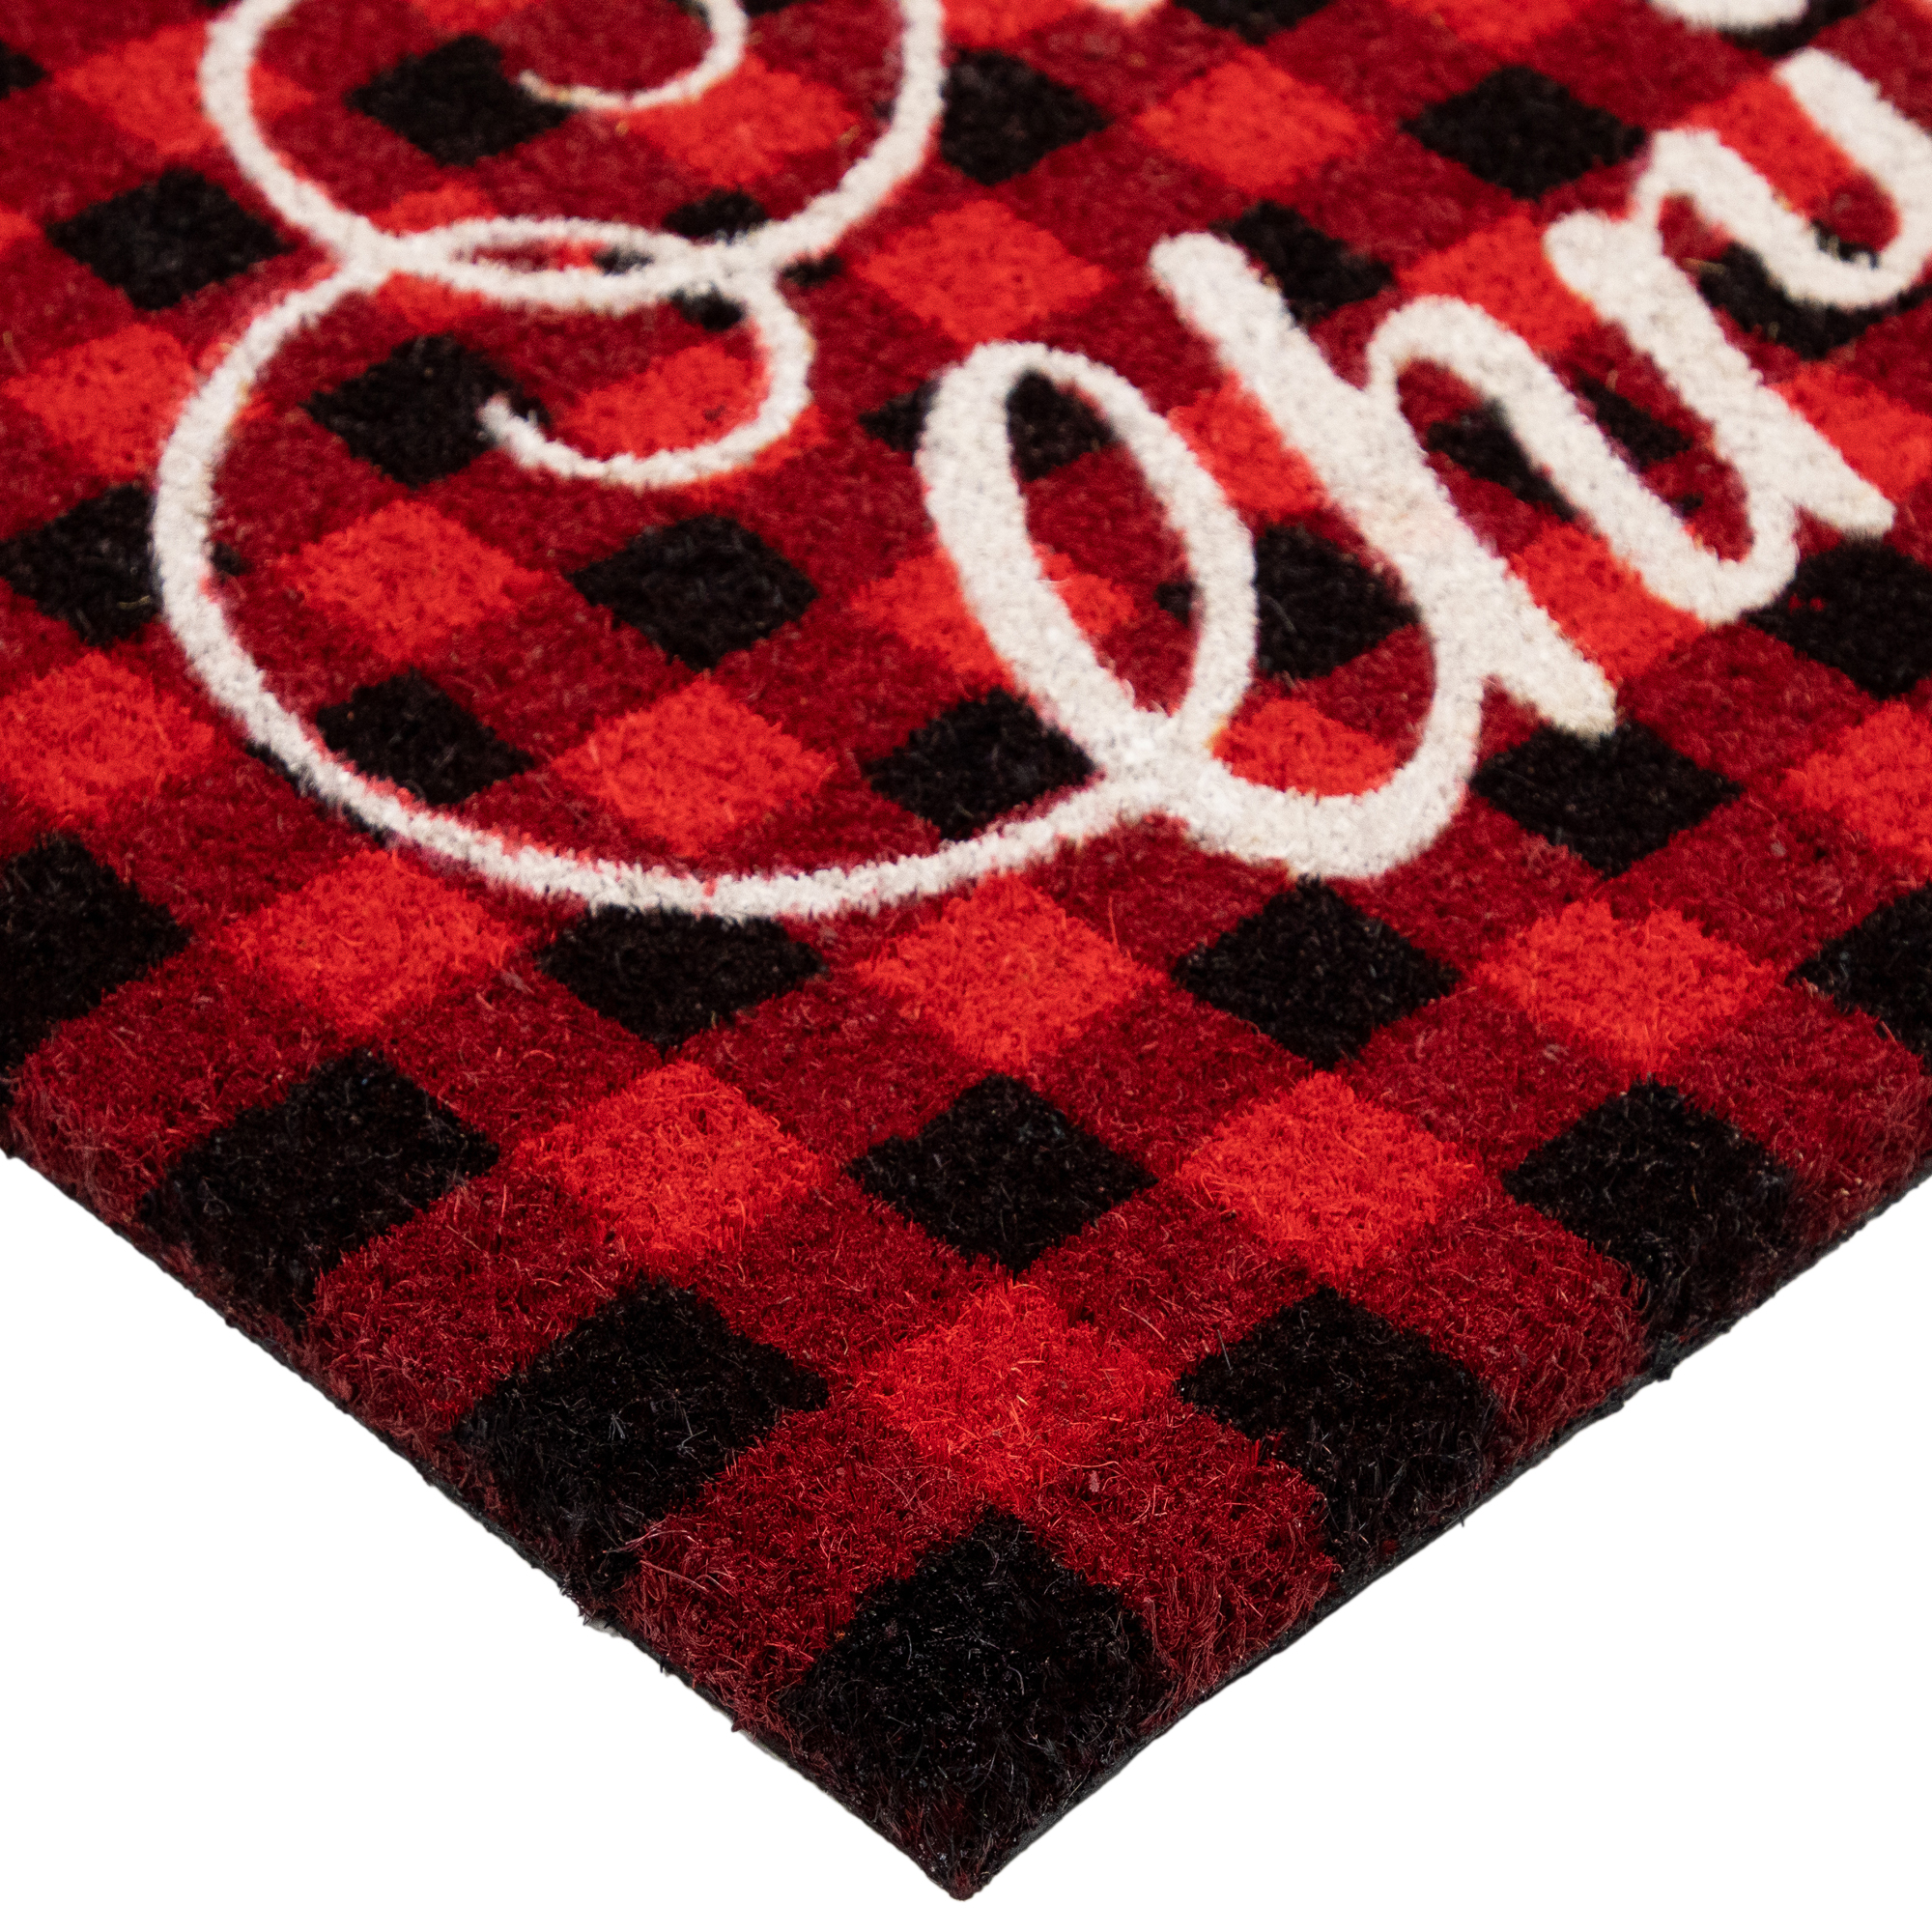 Northlight Red and Black Plaid "Merry Christmas" Natural Coir Christmas Outdoor Doormat 18" x 30"